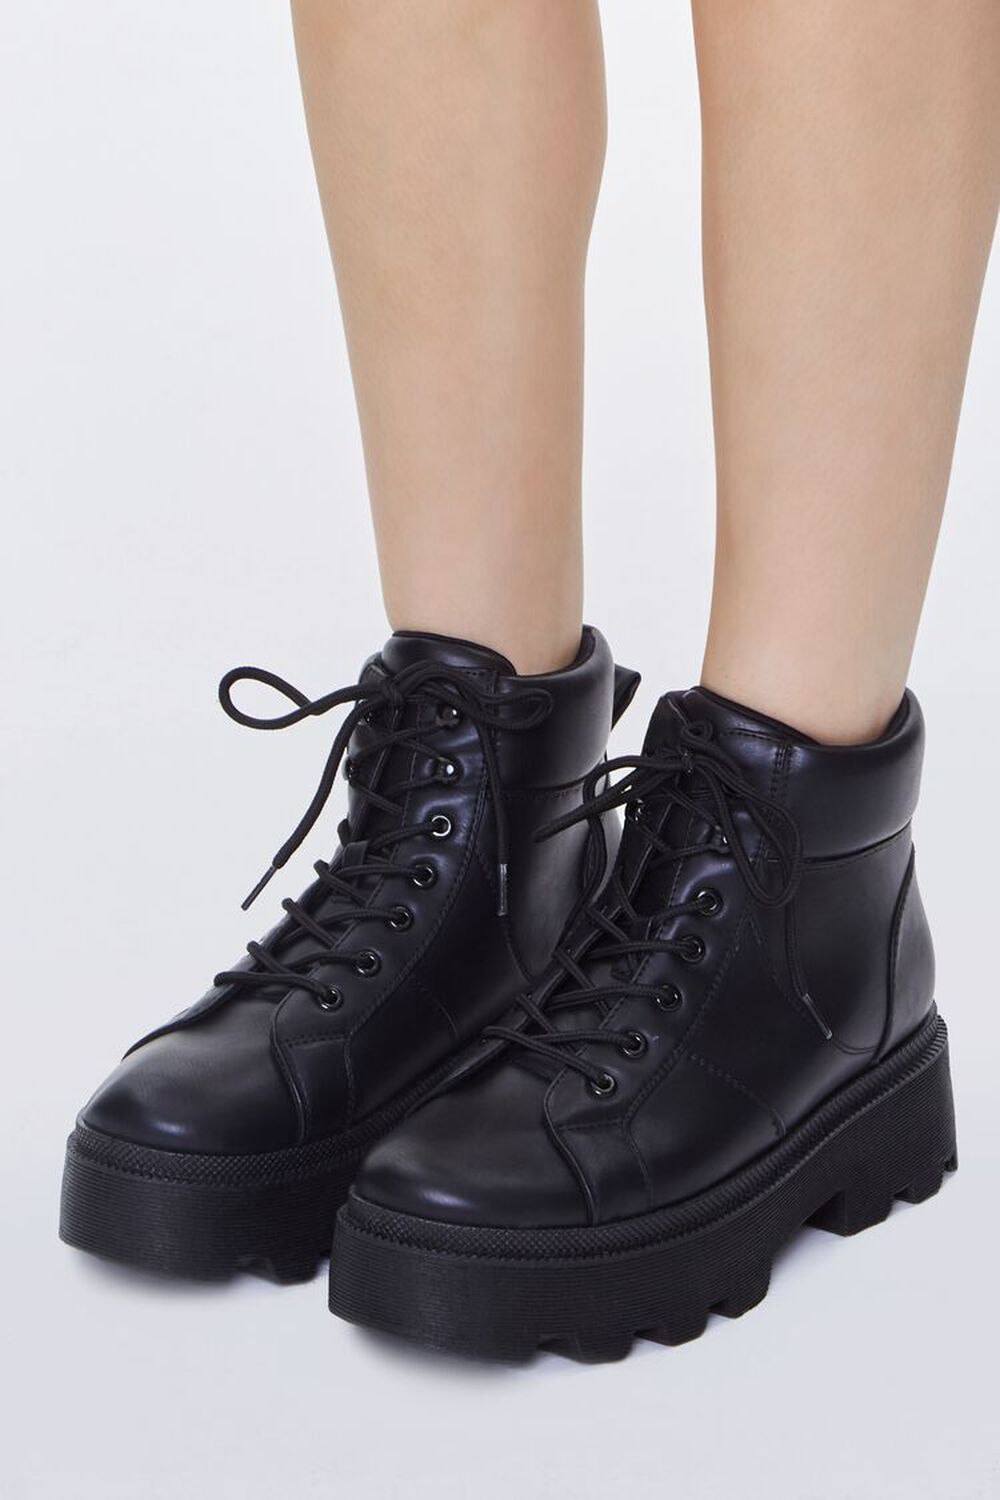 BLACK Faux Leather Lace-Up Booties, image 1